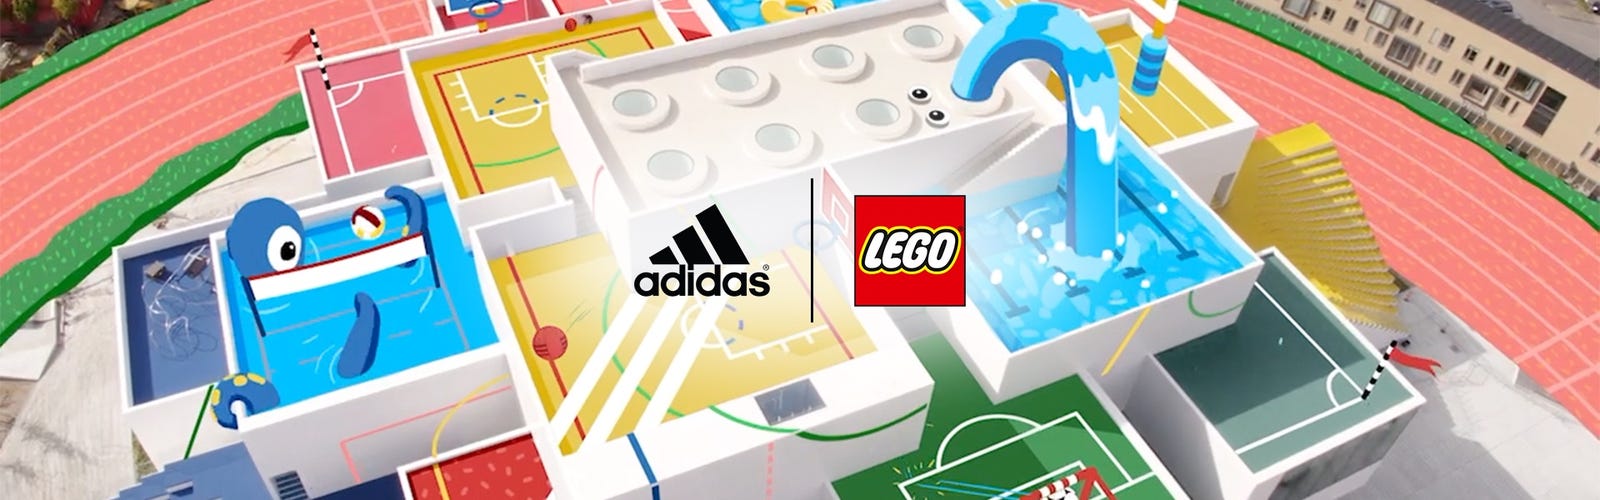 About adidas x LEGO® Collection